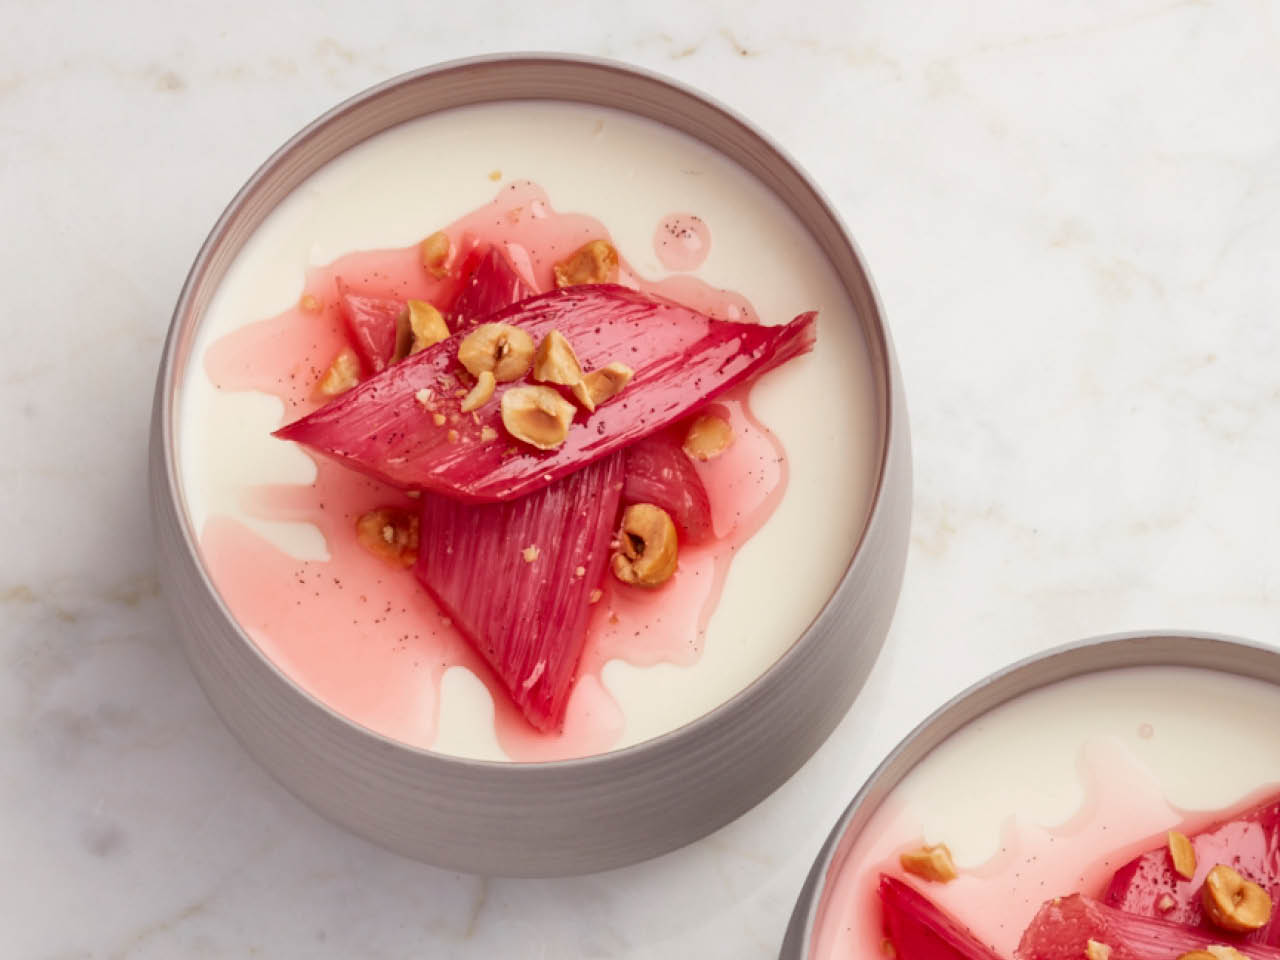 Buttermilk pannacotta with poached rhubarb